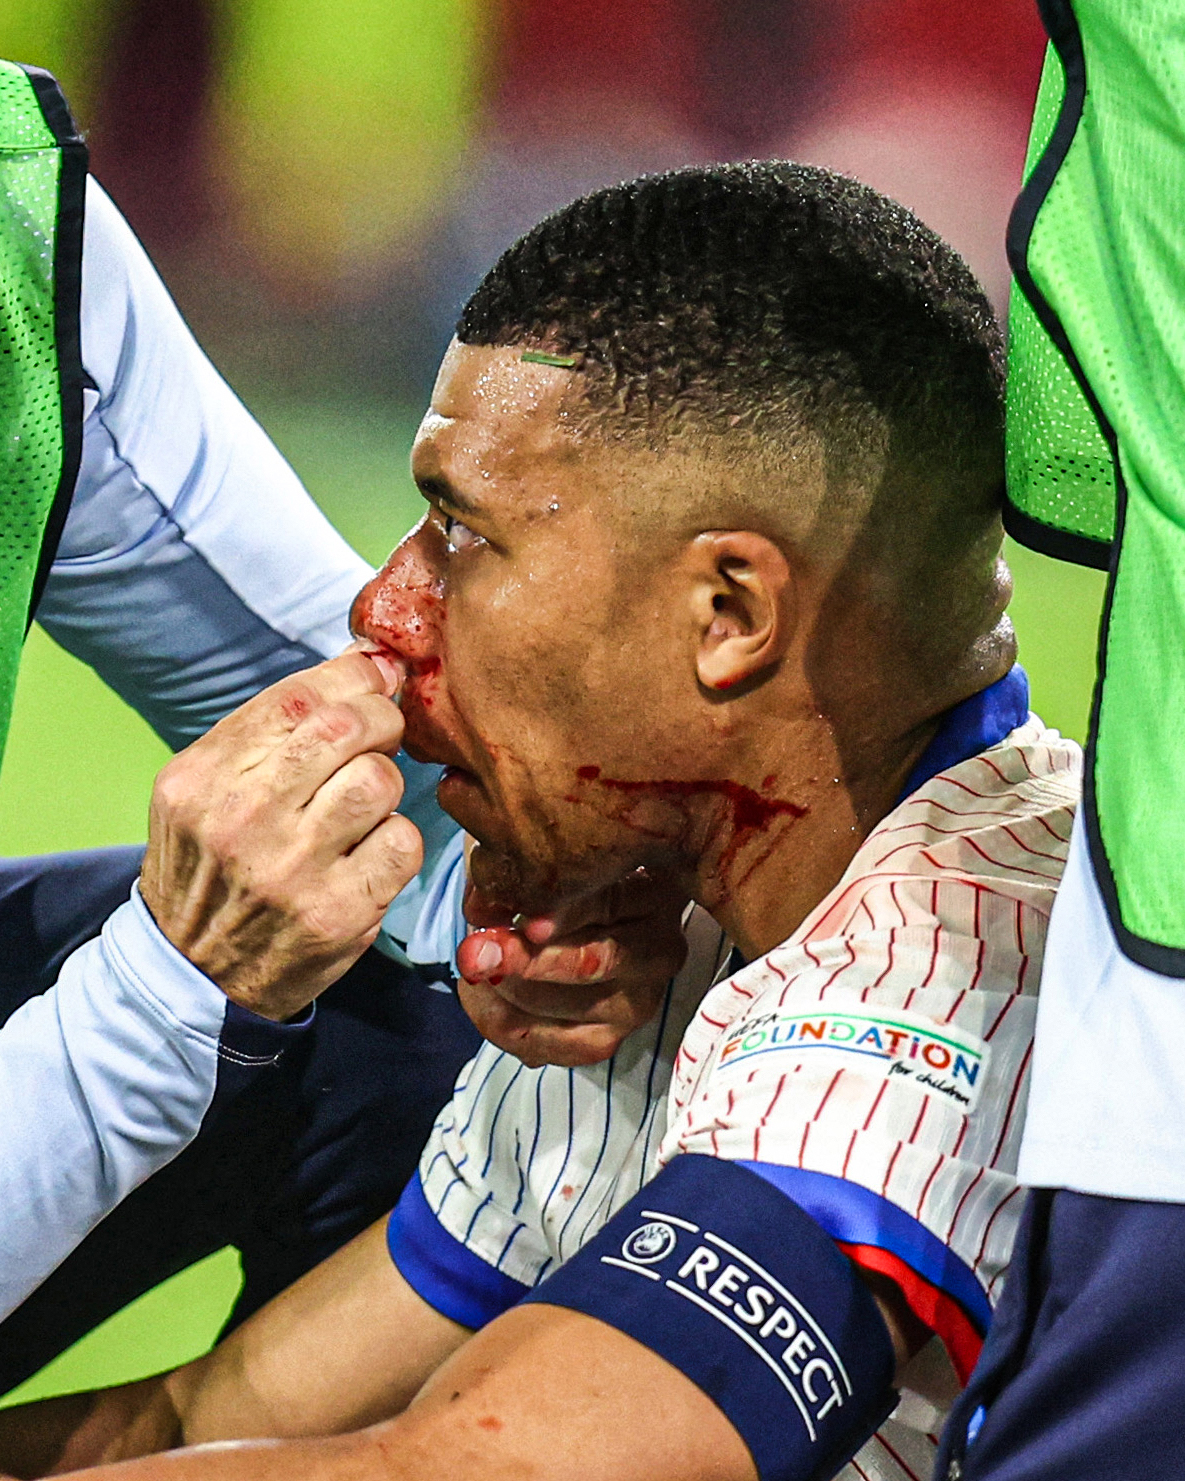 Kylian Mbappe is treated for broken nose. (X)